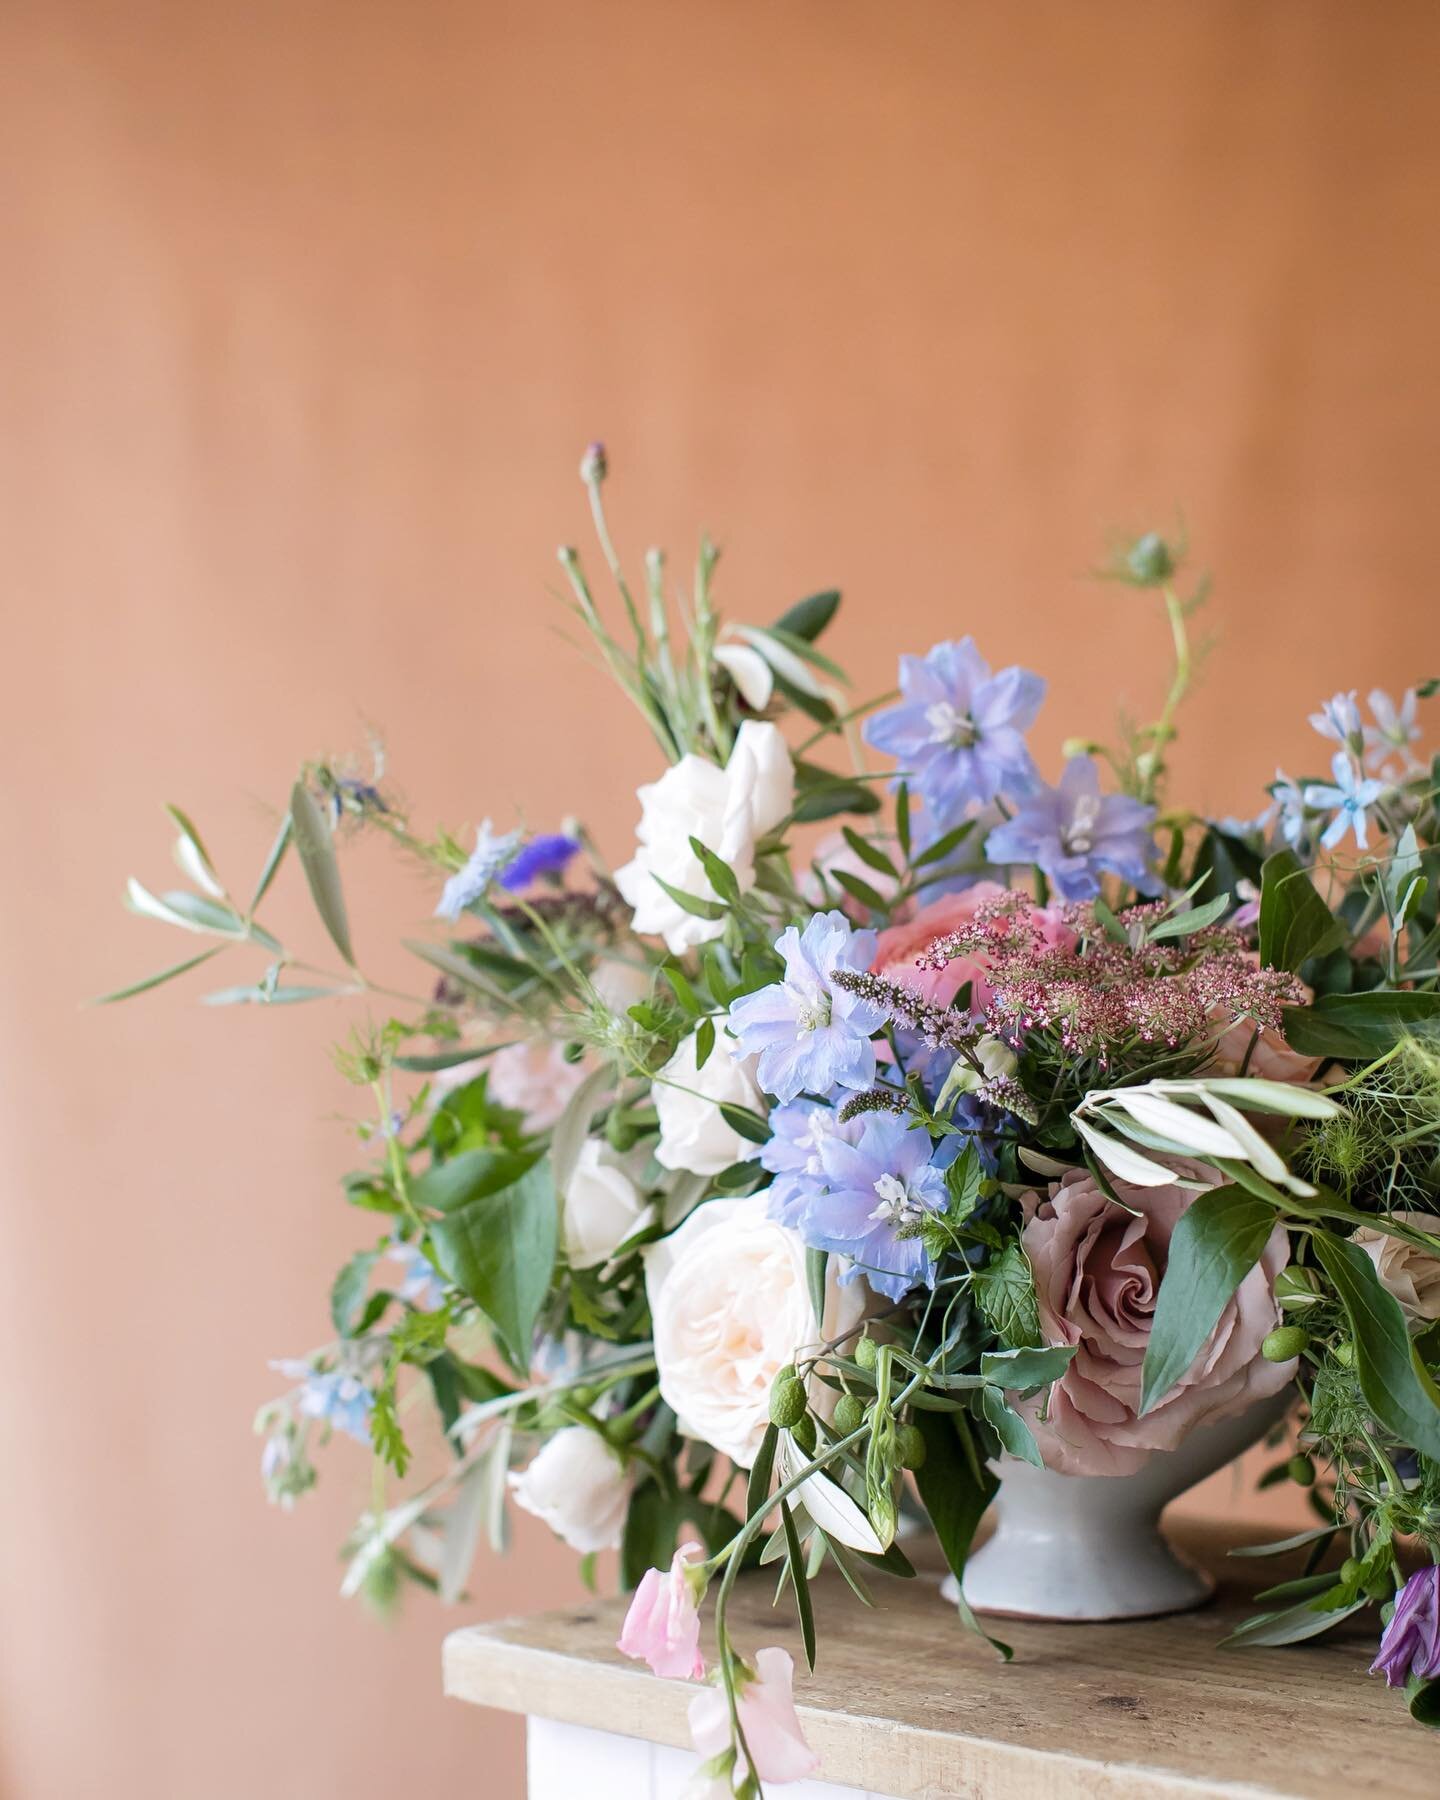 🌸Pastel florals🌸

One of our most popular colour palettes this year. A beautifully styled seasonal flower arrangement sitting pretty on a rustic wooden bar for a summer wedding. 

🌺 @flowersbypassion 
📸 @laraarnottphotography 

#weddings #parties